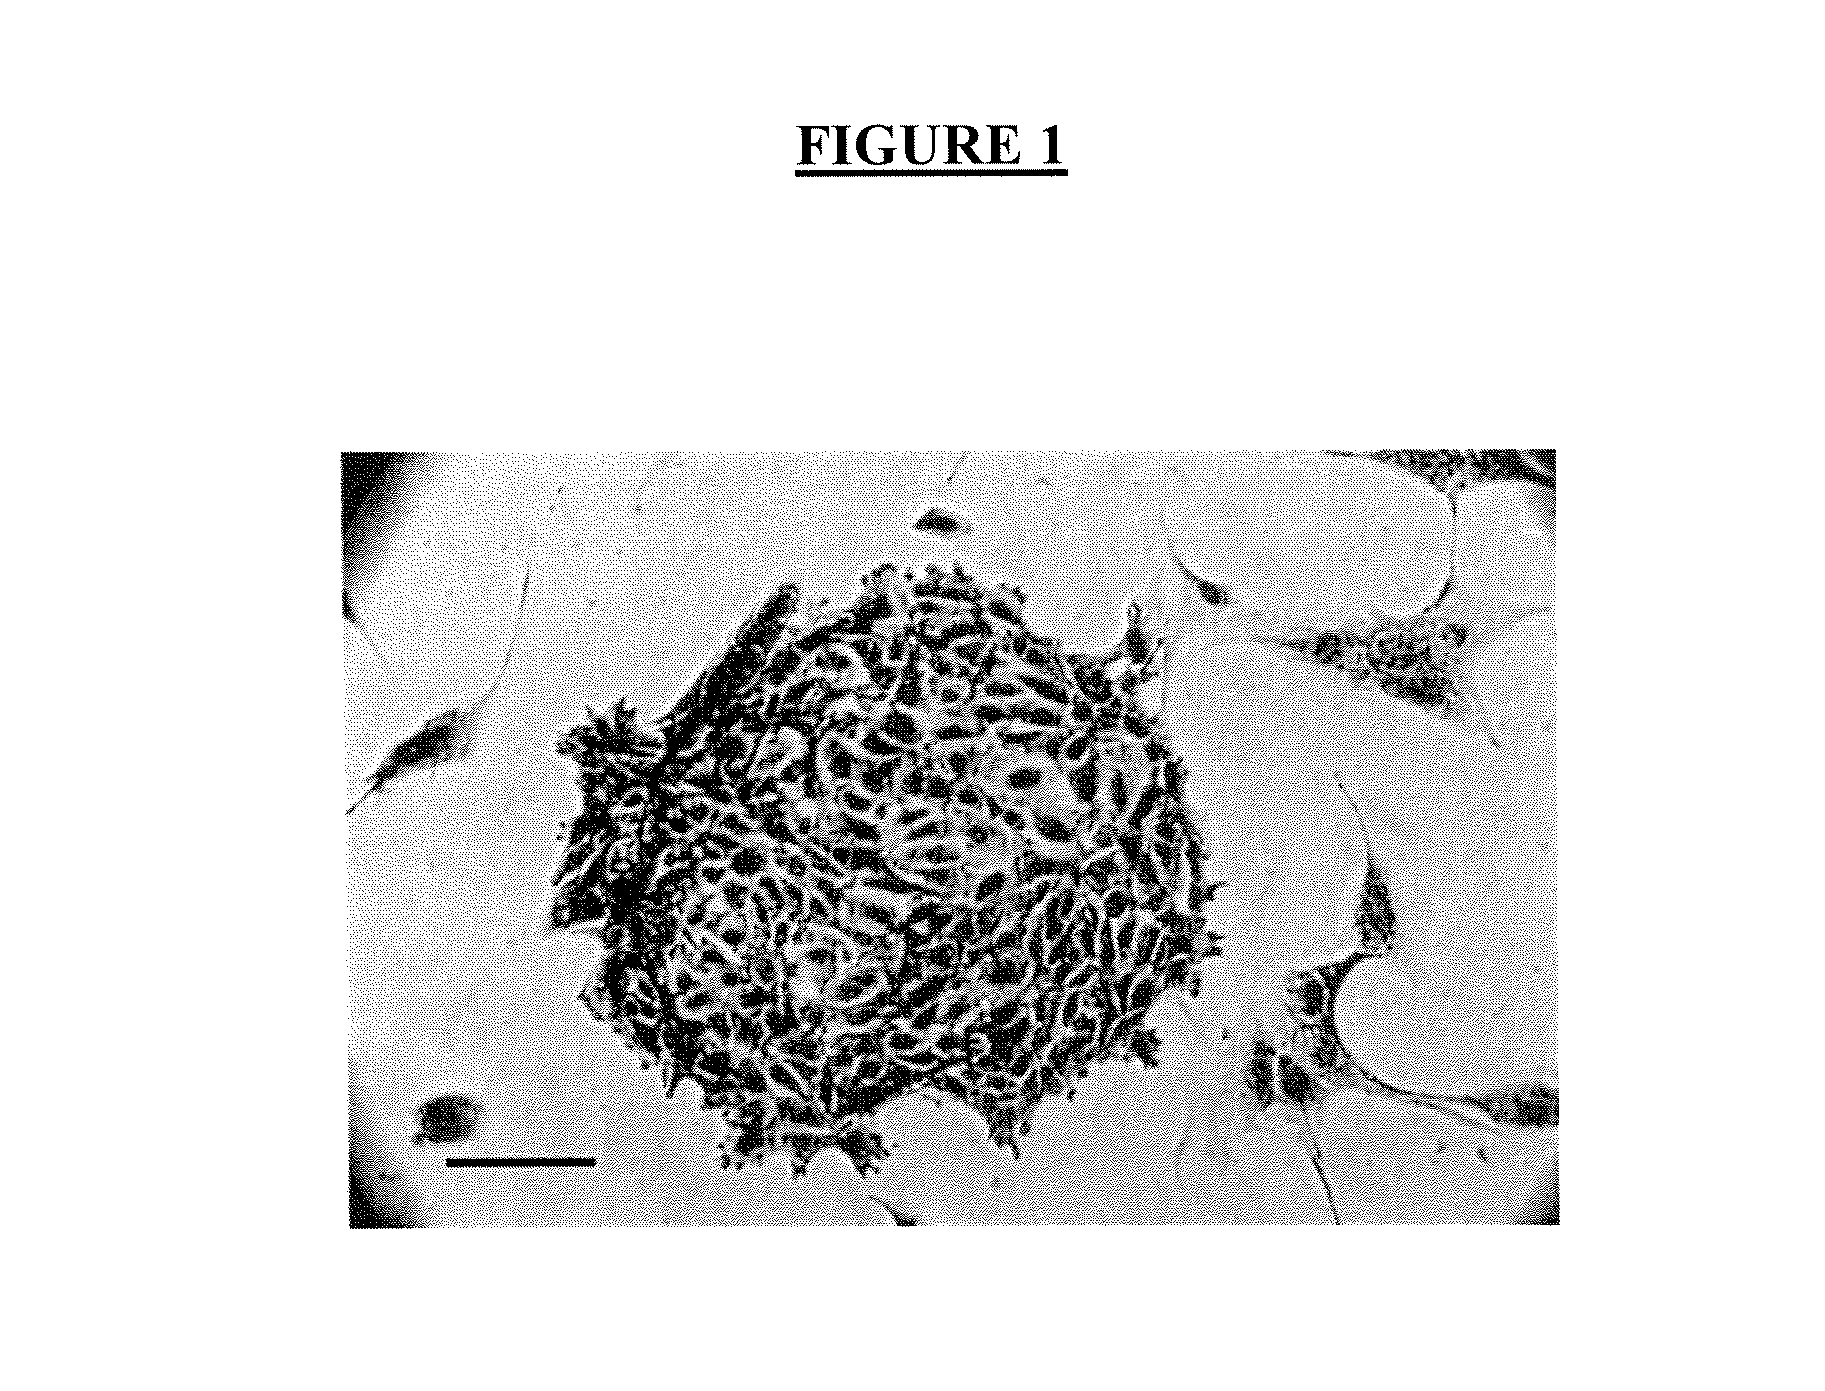 Method for the Discrimination and Isolation of Mammary Epithelial Stem and Colony-Forming Cells